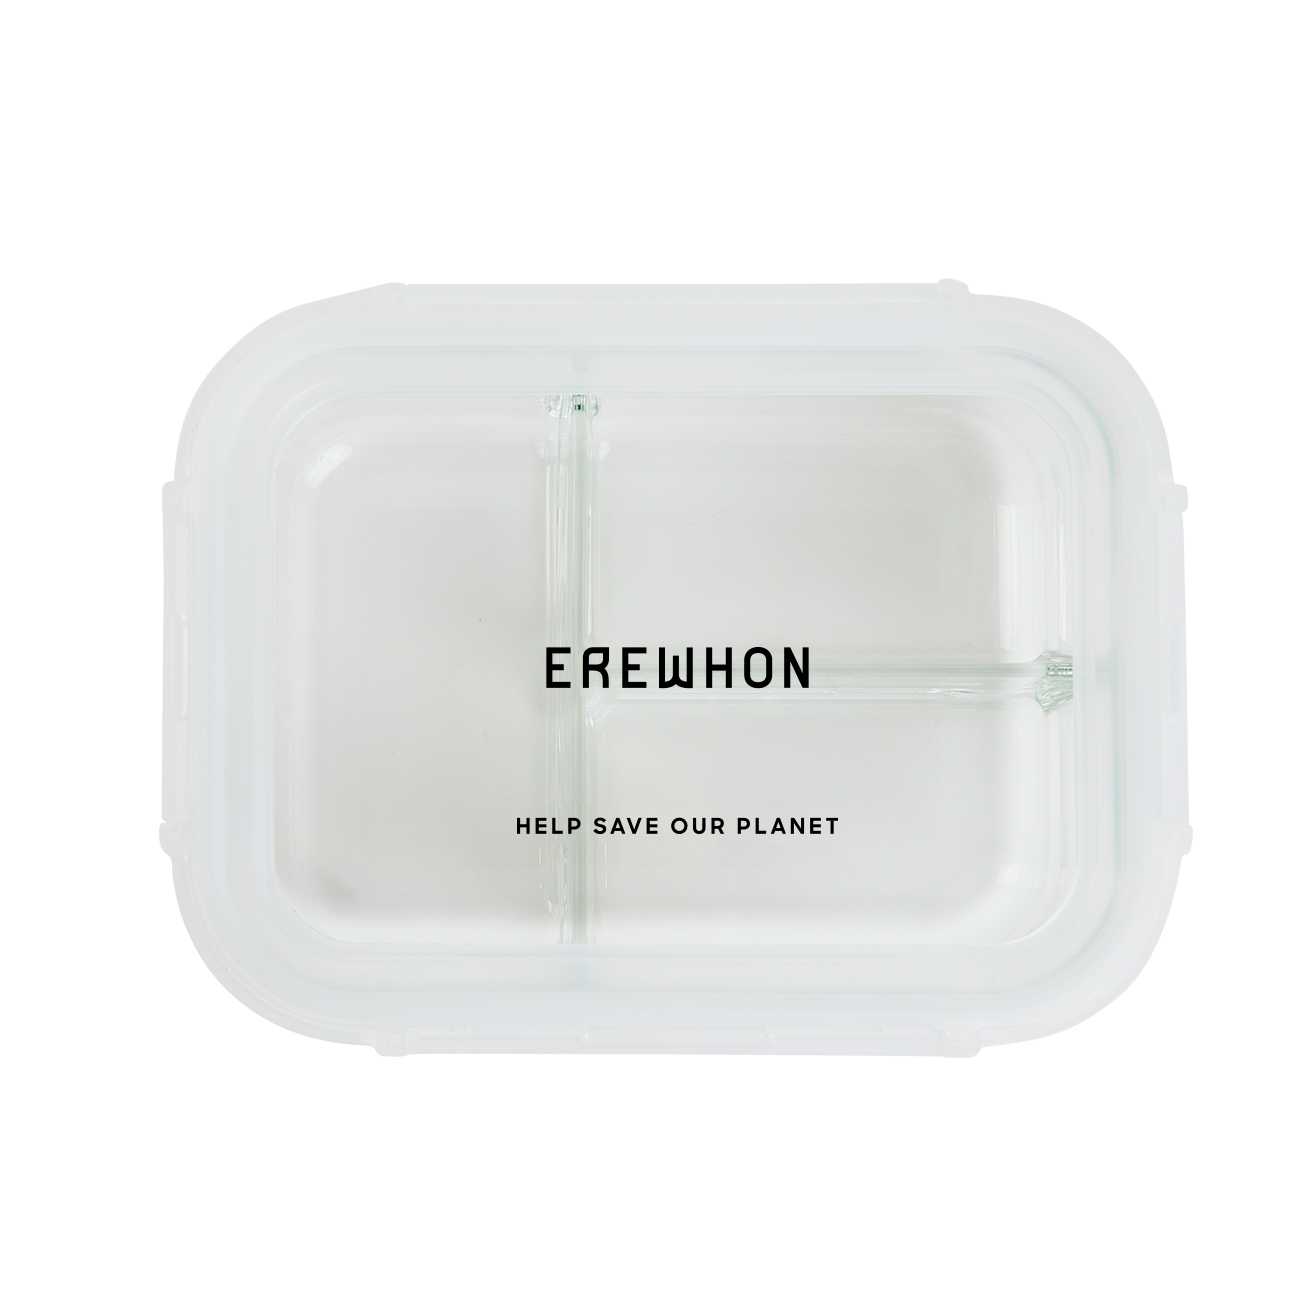 "Black Erewhon 3-section glass storage containers with airtight lids